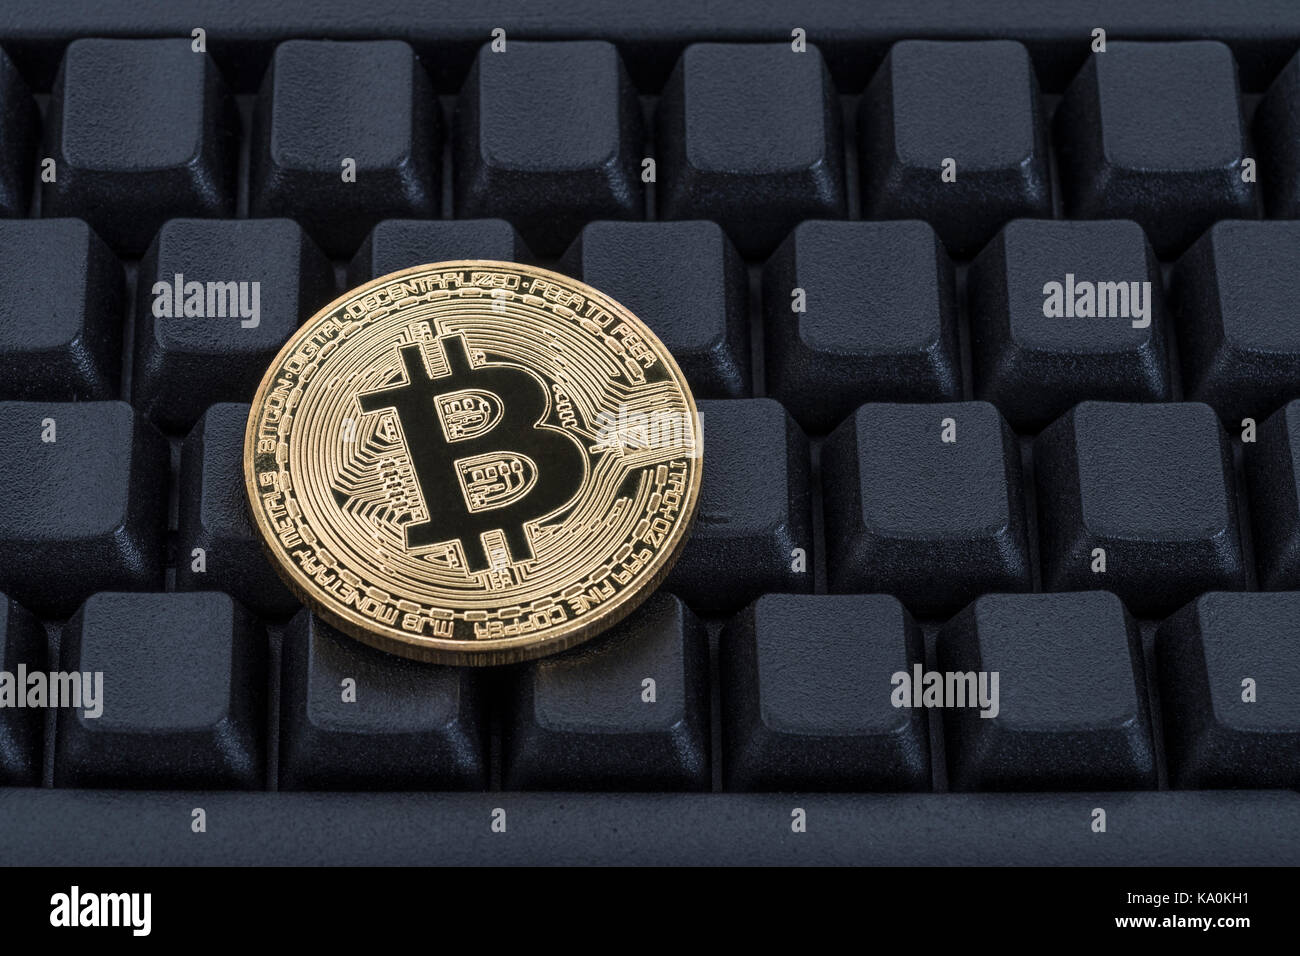 Gold coloured BitCoin / Bitcoin cryptocurrency token on a black Qwerty keyboard - metaphor for online transactions, Darkweb cybercrime, & e-commerce. Stock Photo